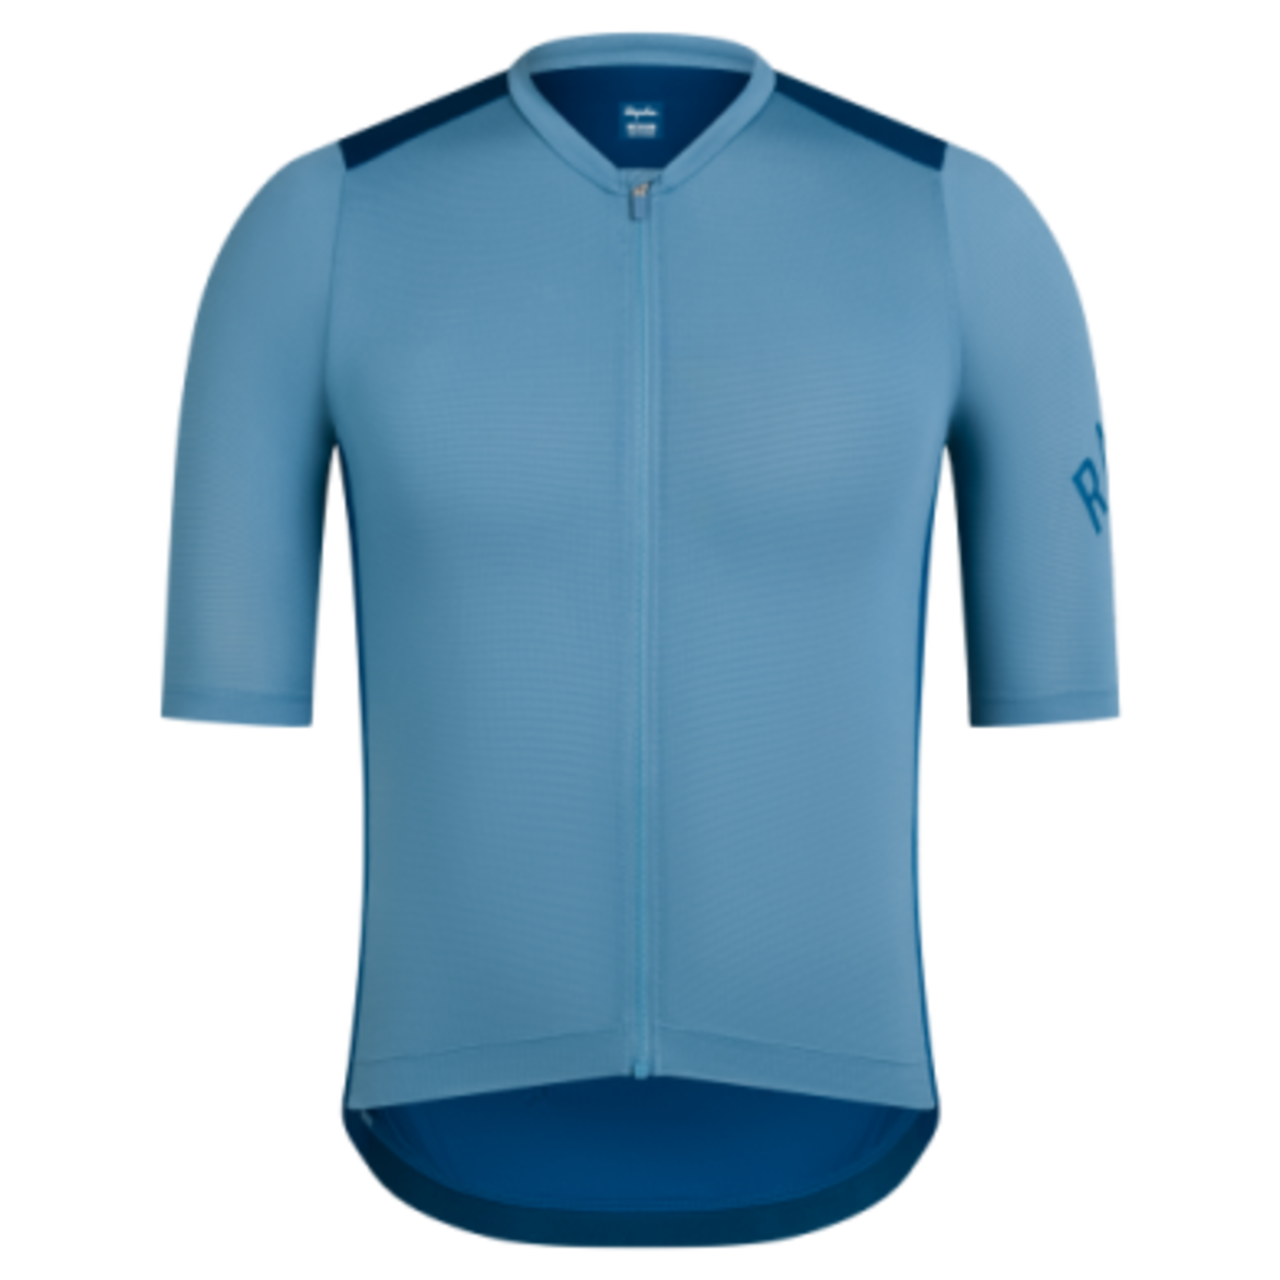 RAPHA MEN'S PRO TEAM TRAINING JERSEY  Dusted Blue/Jewelled Blue